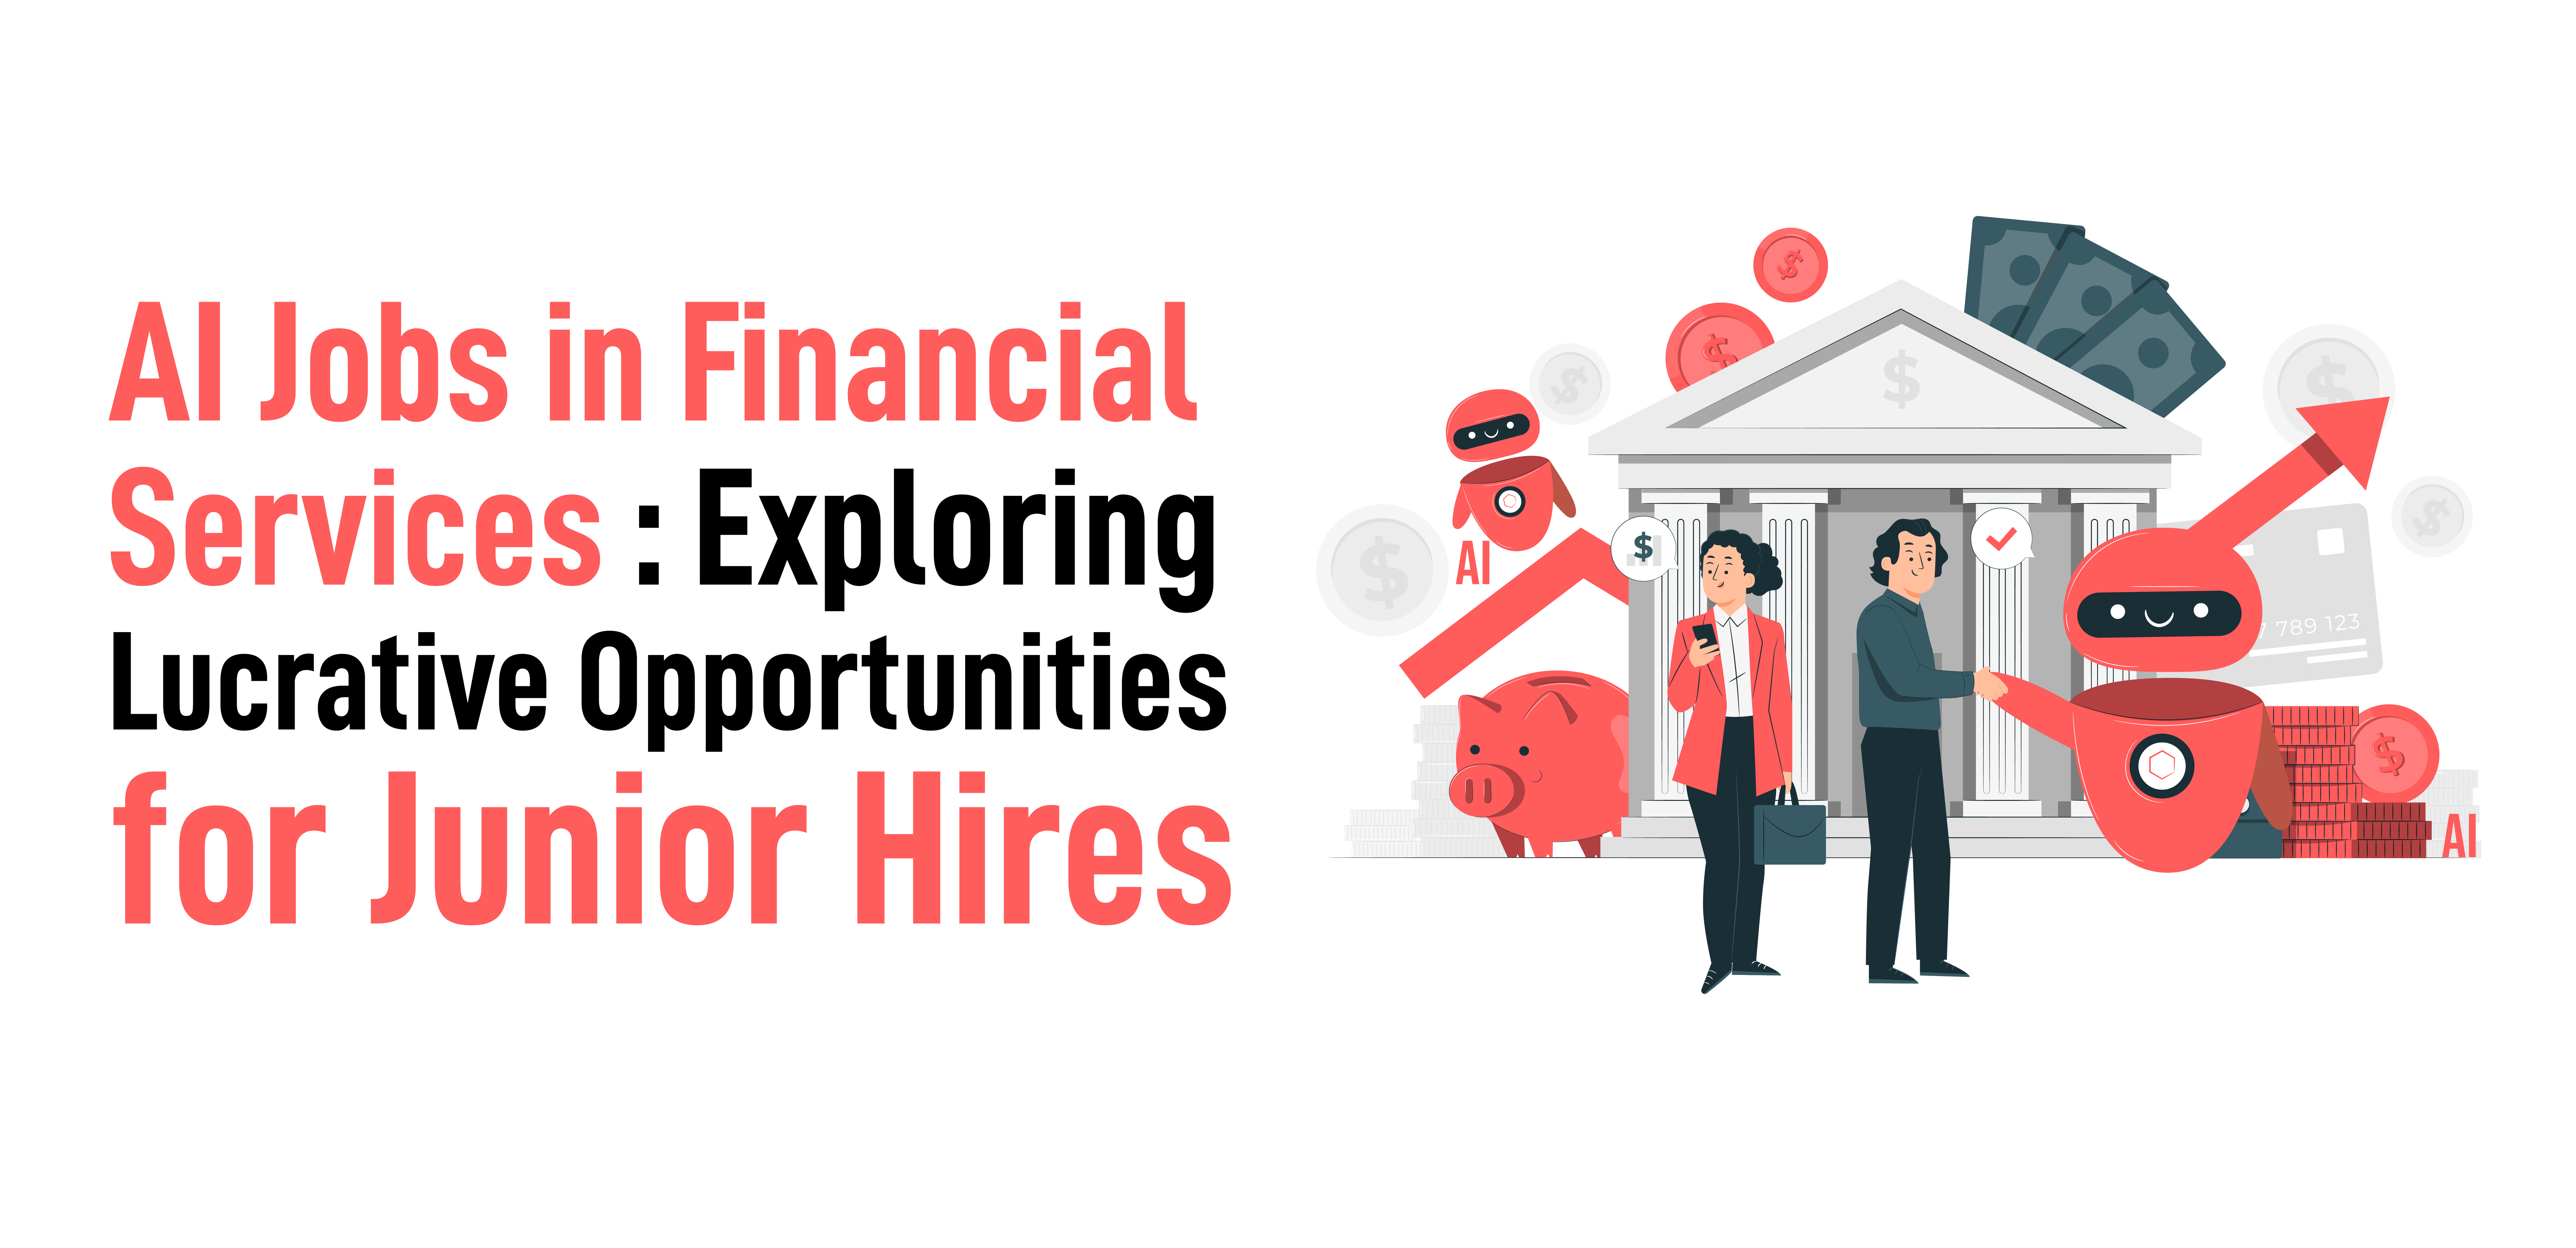 AI Jobs in Financial Services: Exploring Lucrative Opportunities for Junior Hires